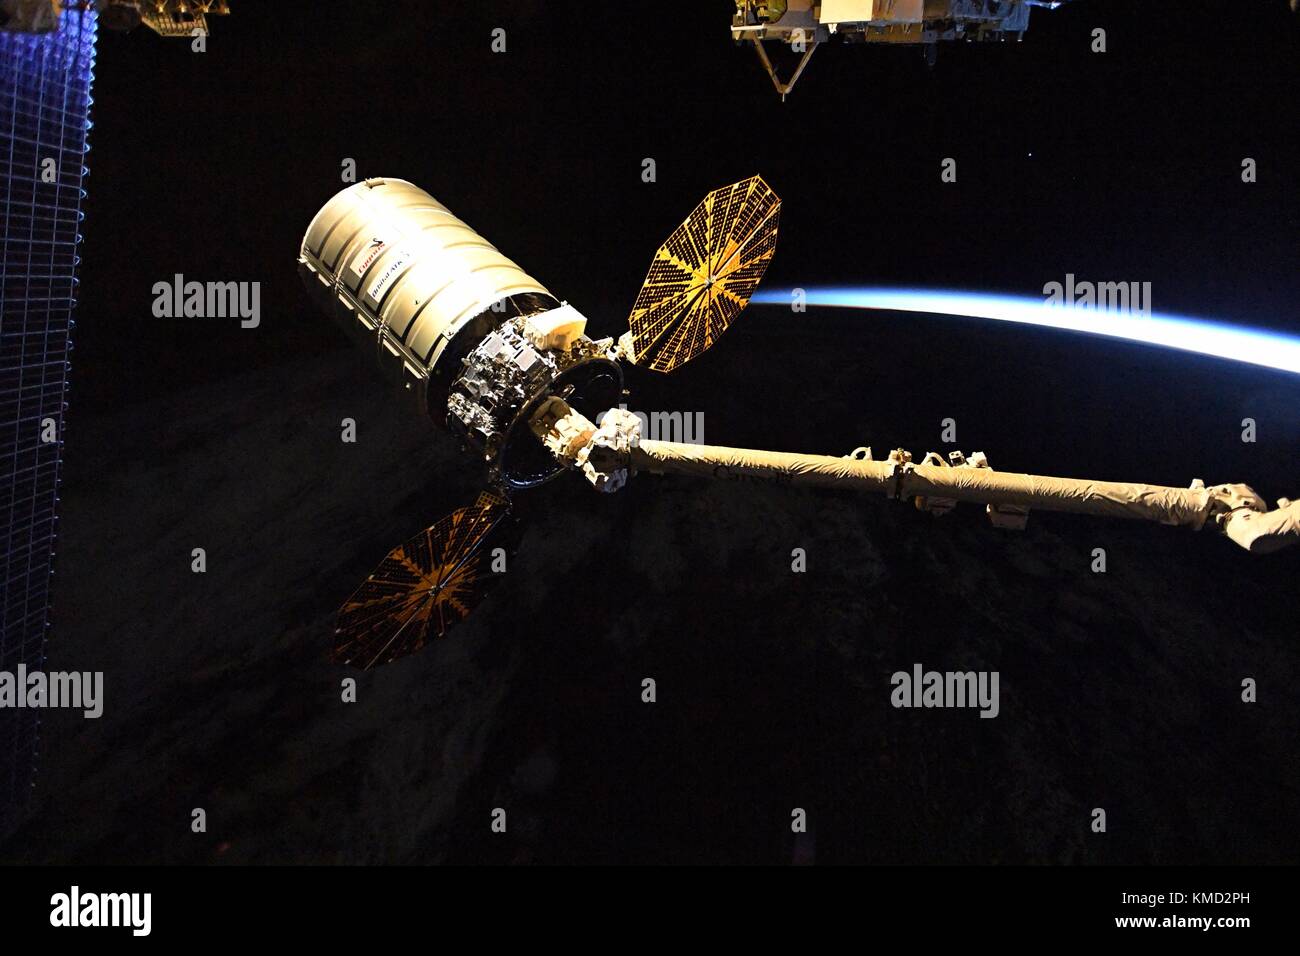 The Orbital ATK Cygnus cargo spacecraft is released by the Canada Arm 2 from the International Space Station December 6, 2017 in Earth Orbit. Cygnus will deployed 14 CubeSats from the NanoRacks deployer and will later be burned up on destructive reentry in the Earth atmosphere. Stock Photo